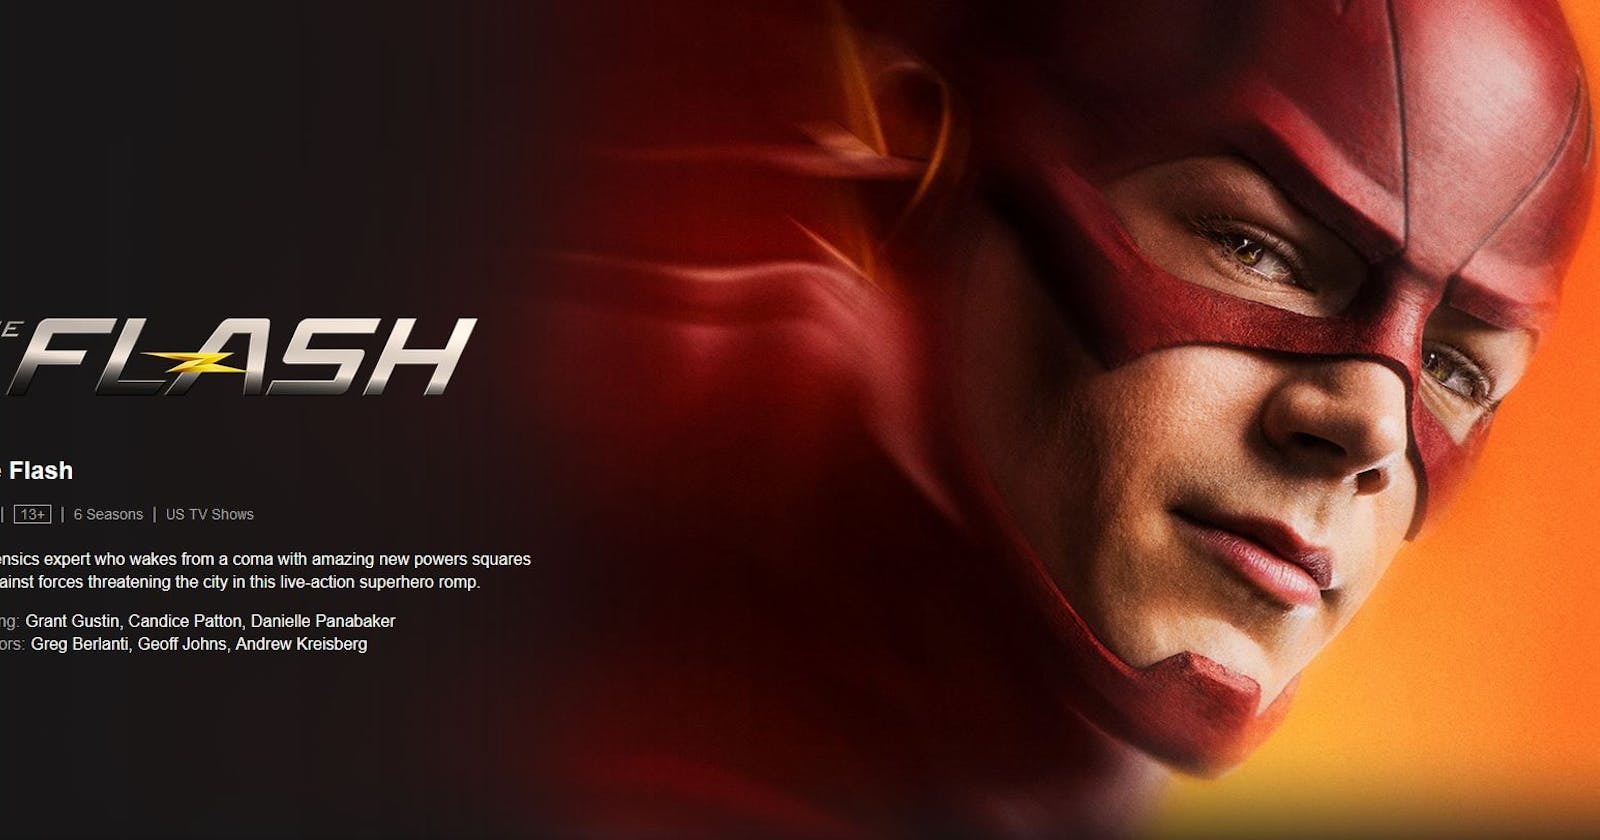 Watch Online Free – Is The Flash DC Movie Streaming at Home